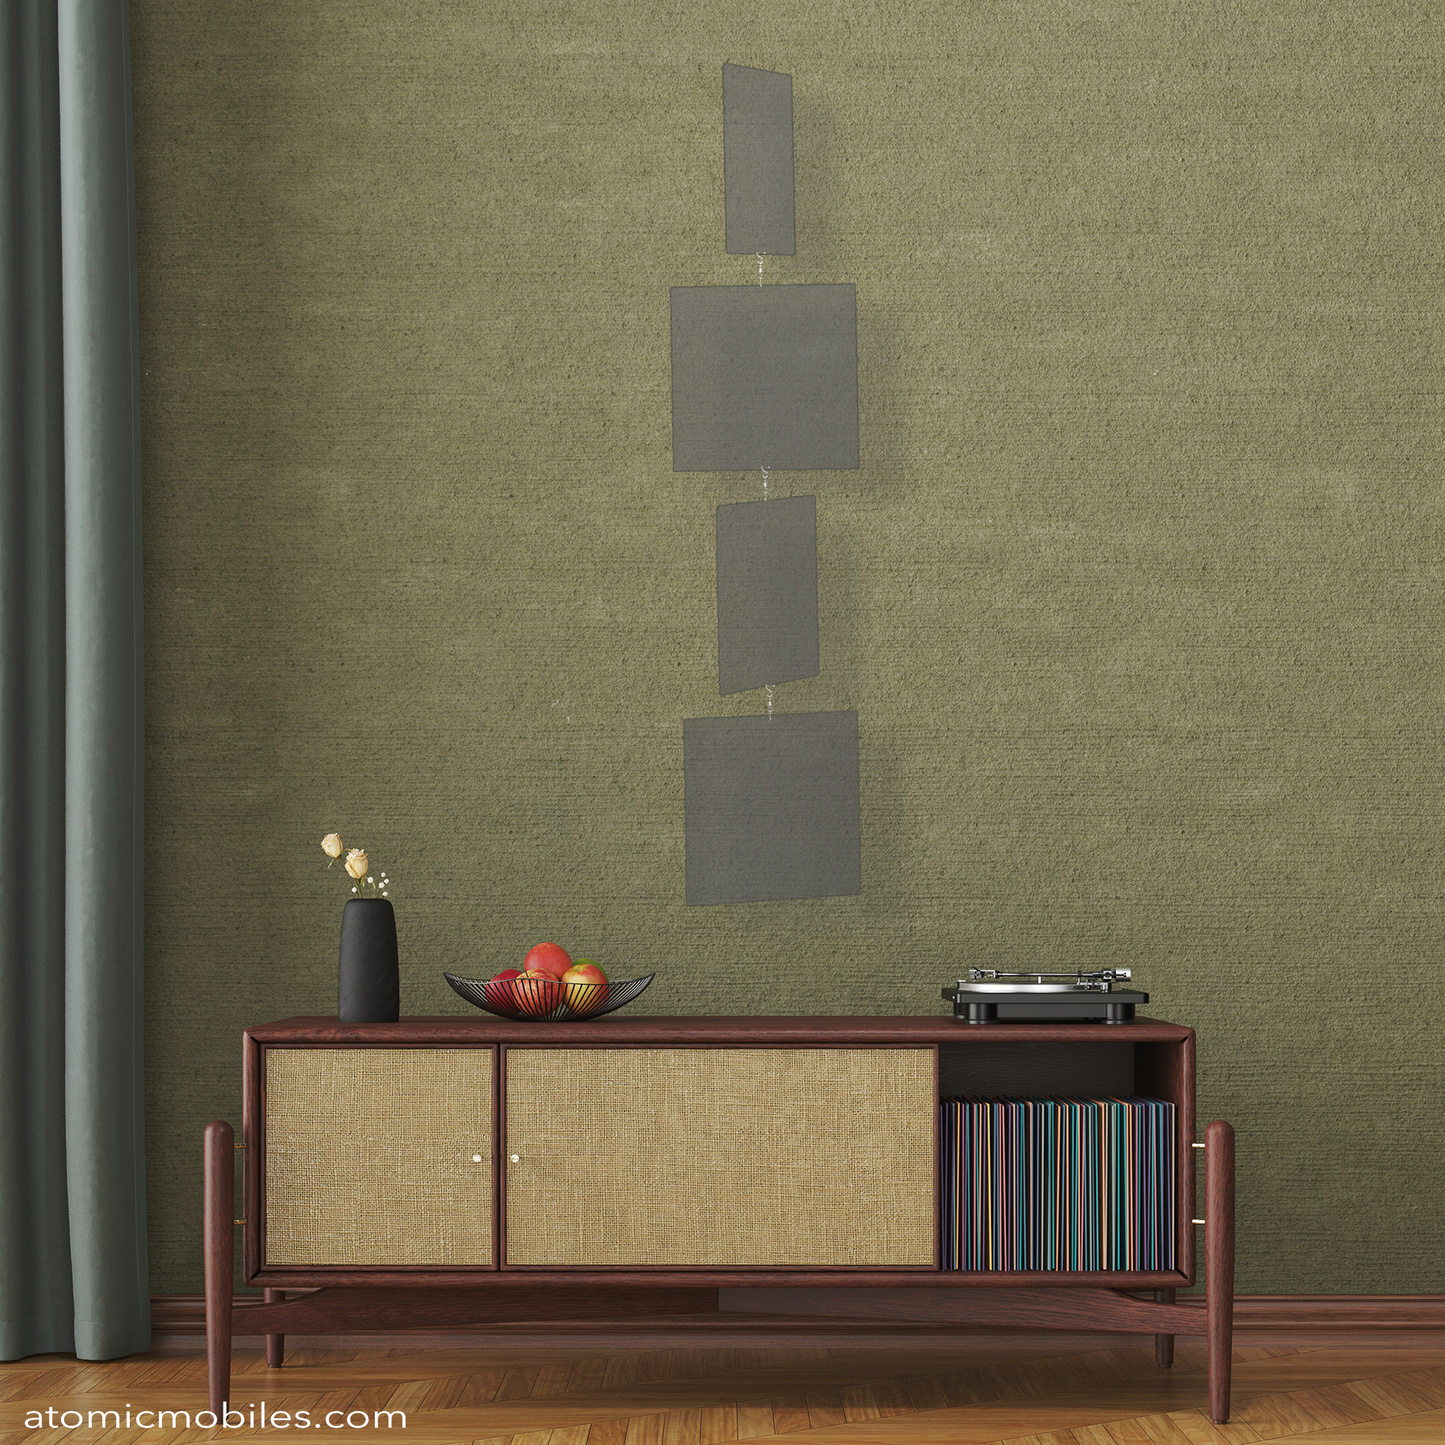 Mid century modern Smoky Gray MODcast mobile in room with sideboard with record player and record albums with dark green wall, drapes, and wood floor by AtomicMobiles.com